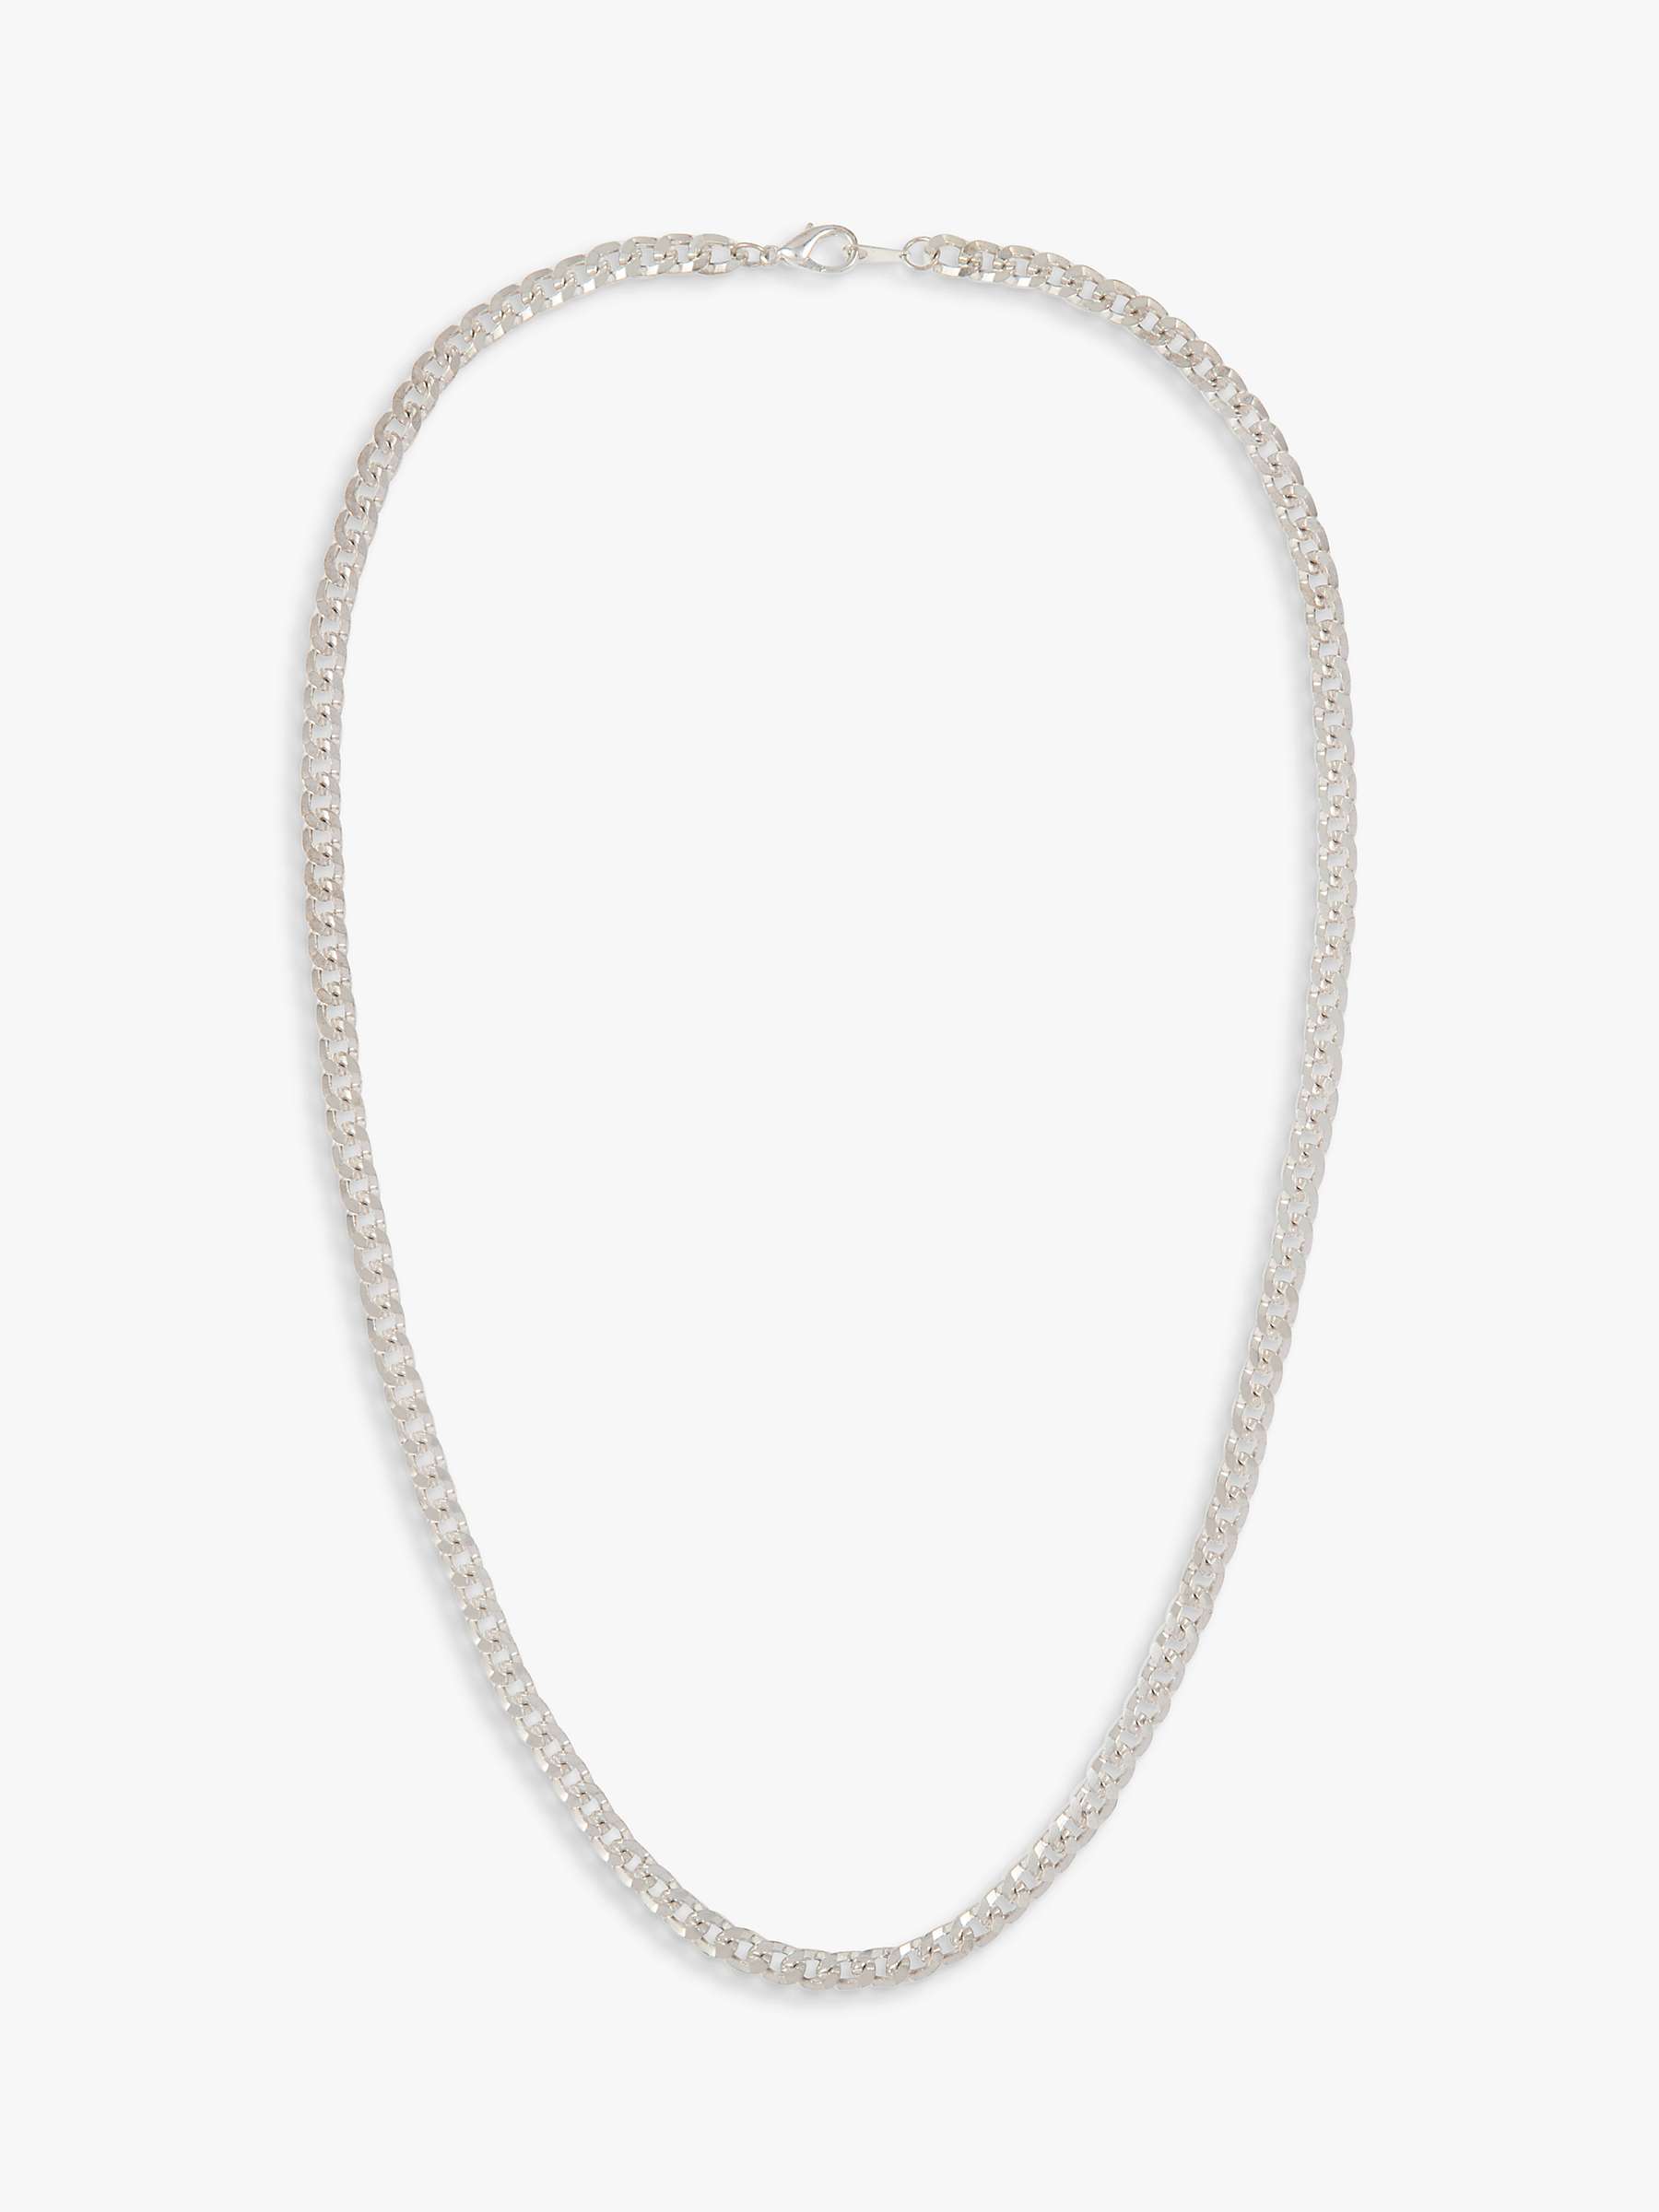 Buy Susan Caplan Vintage Rediscovered Collection Silver Plated Curb Chain Necklace, Silver Online at johnlewis.com